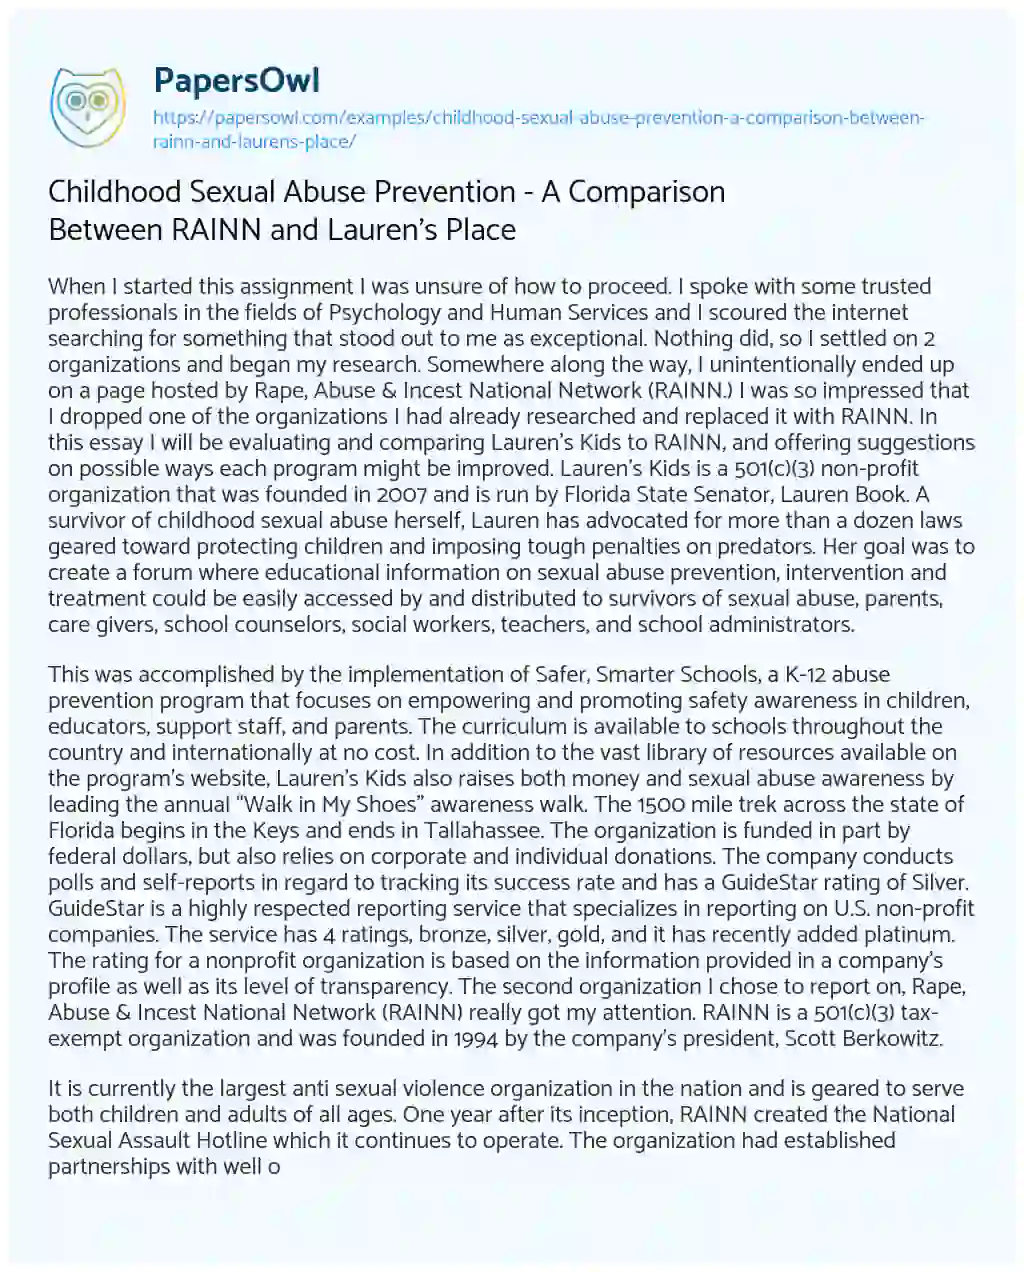 Essay on Childhood Sexual Abuse Prevention – a Comparison between RAINN and Lauren’s Place